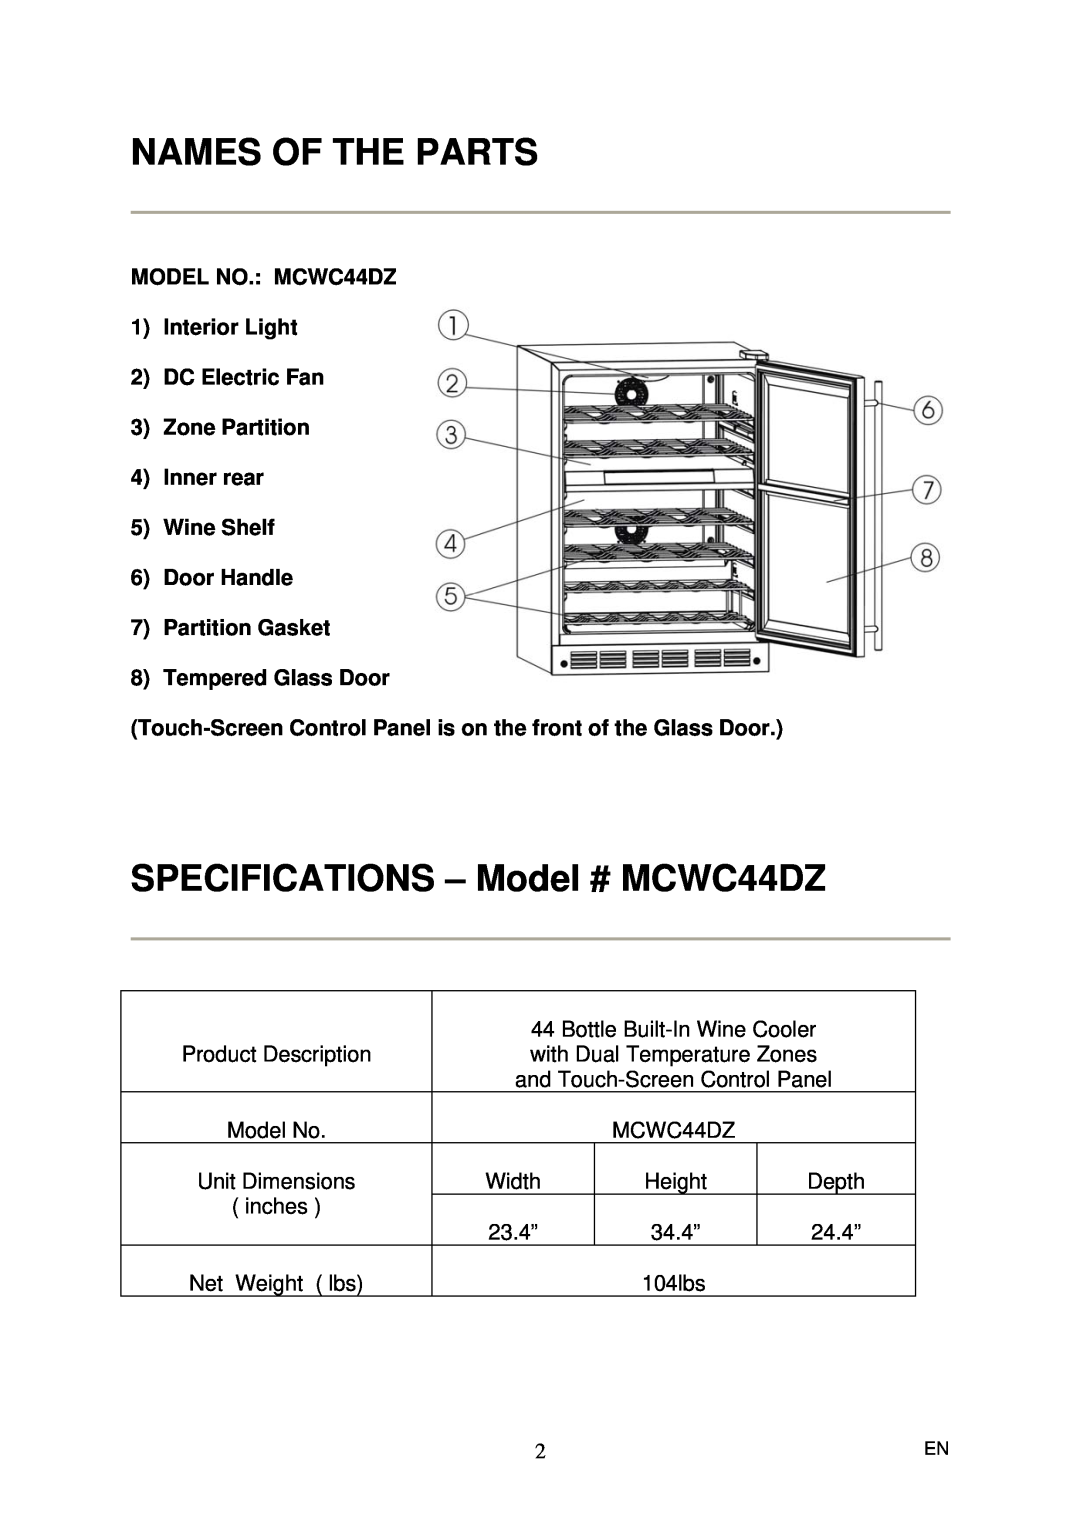 Magic Chef instruction manual Names Of The Parts, SPECIFICATIONS - Model # MCWC44DZ, MODEL NO. MCWC44DZ 1Interior Light 